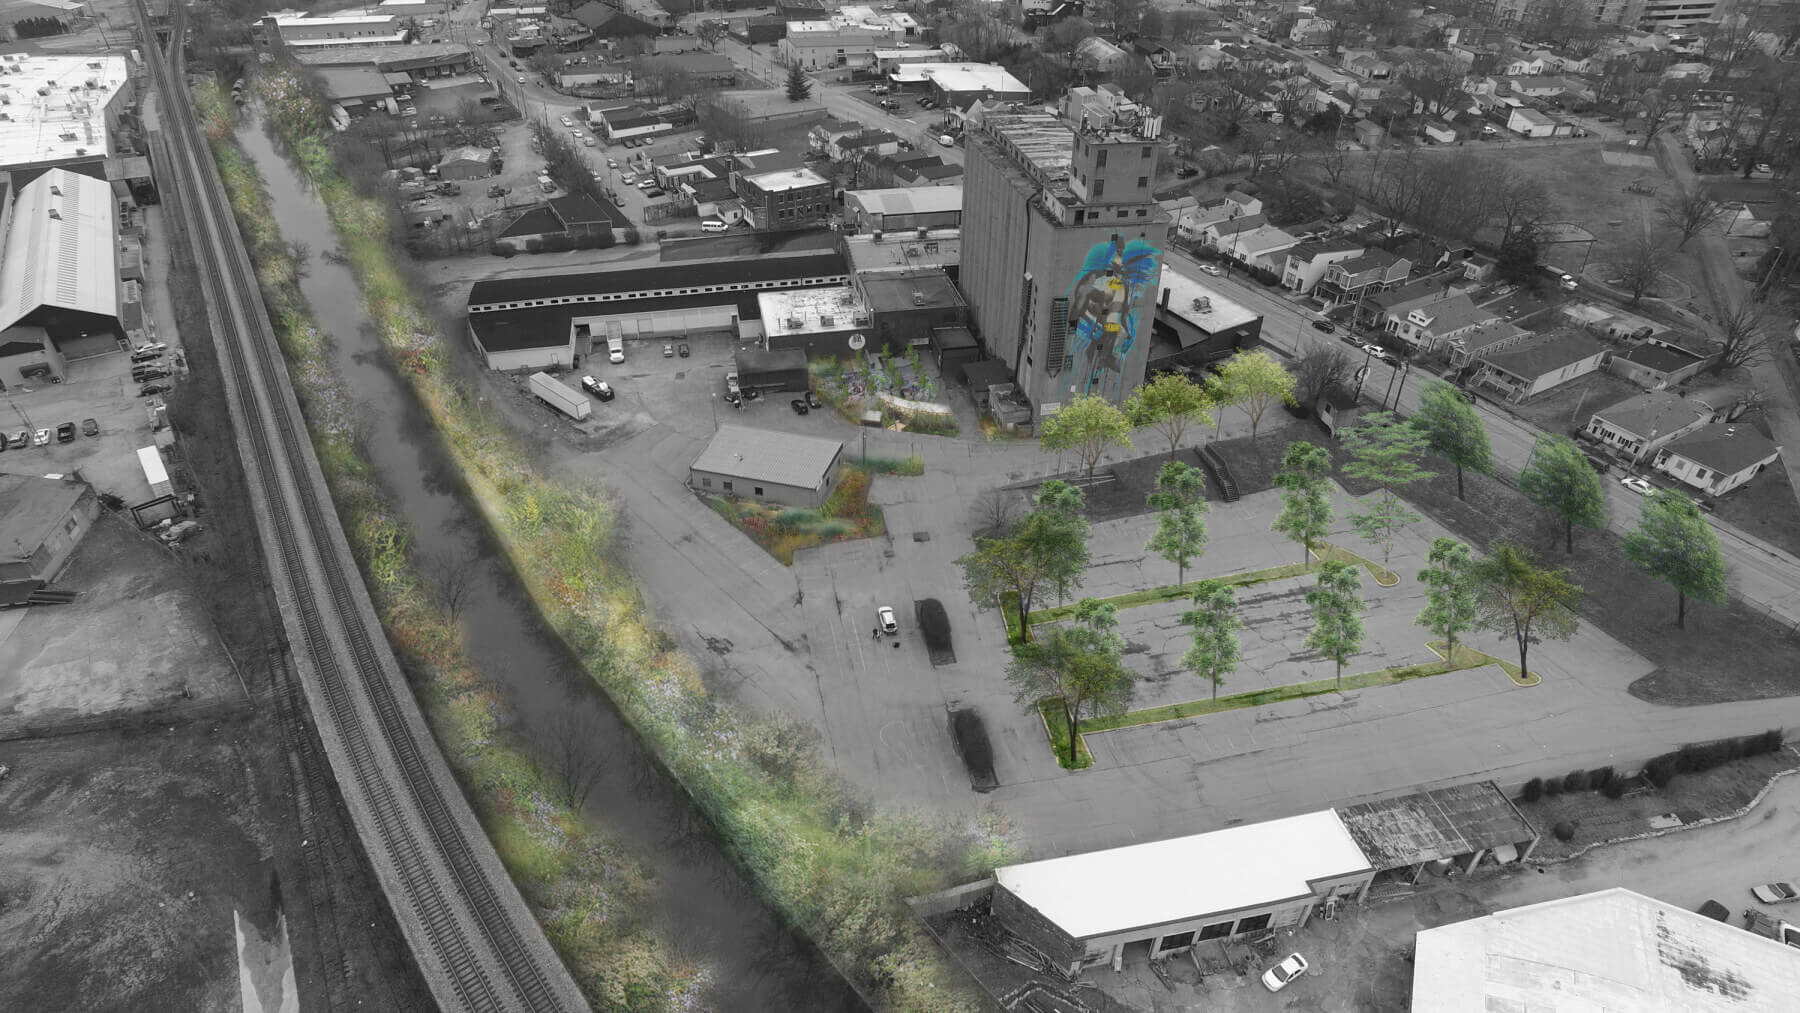 aerial view of proposed improvements to Milewide Brewery site